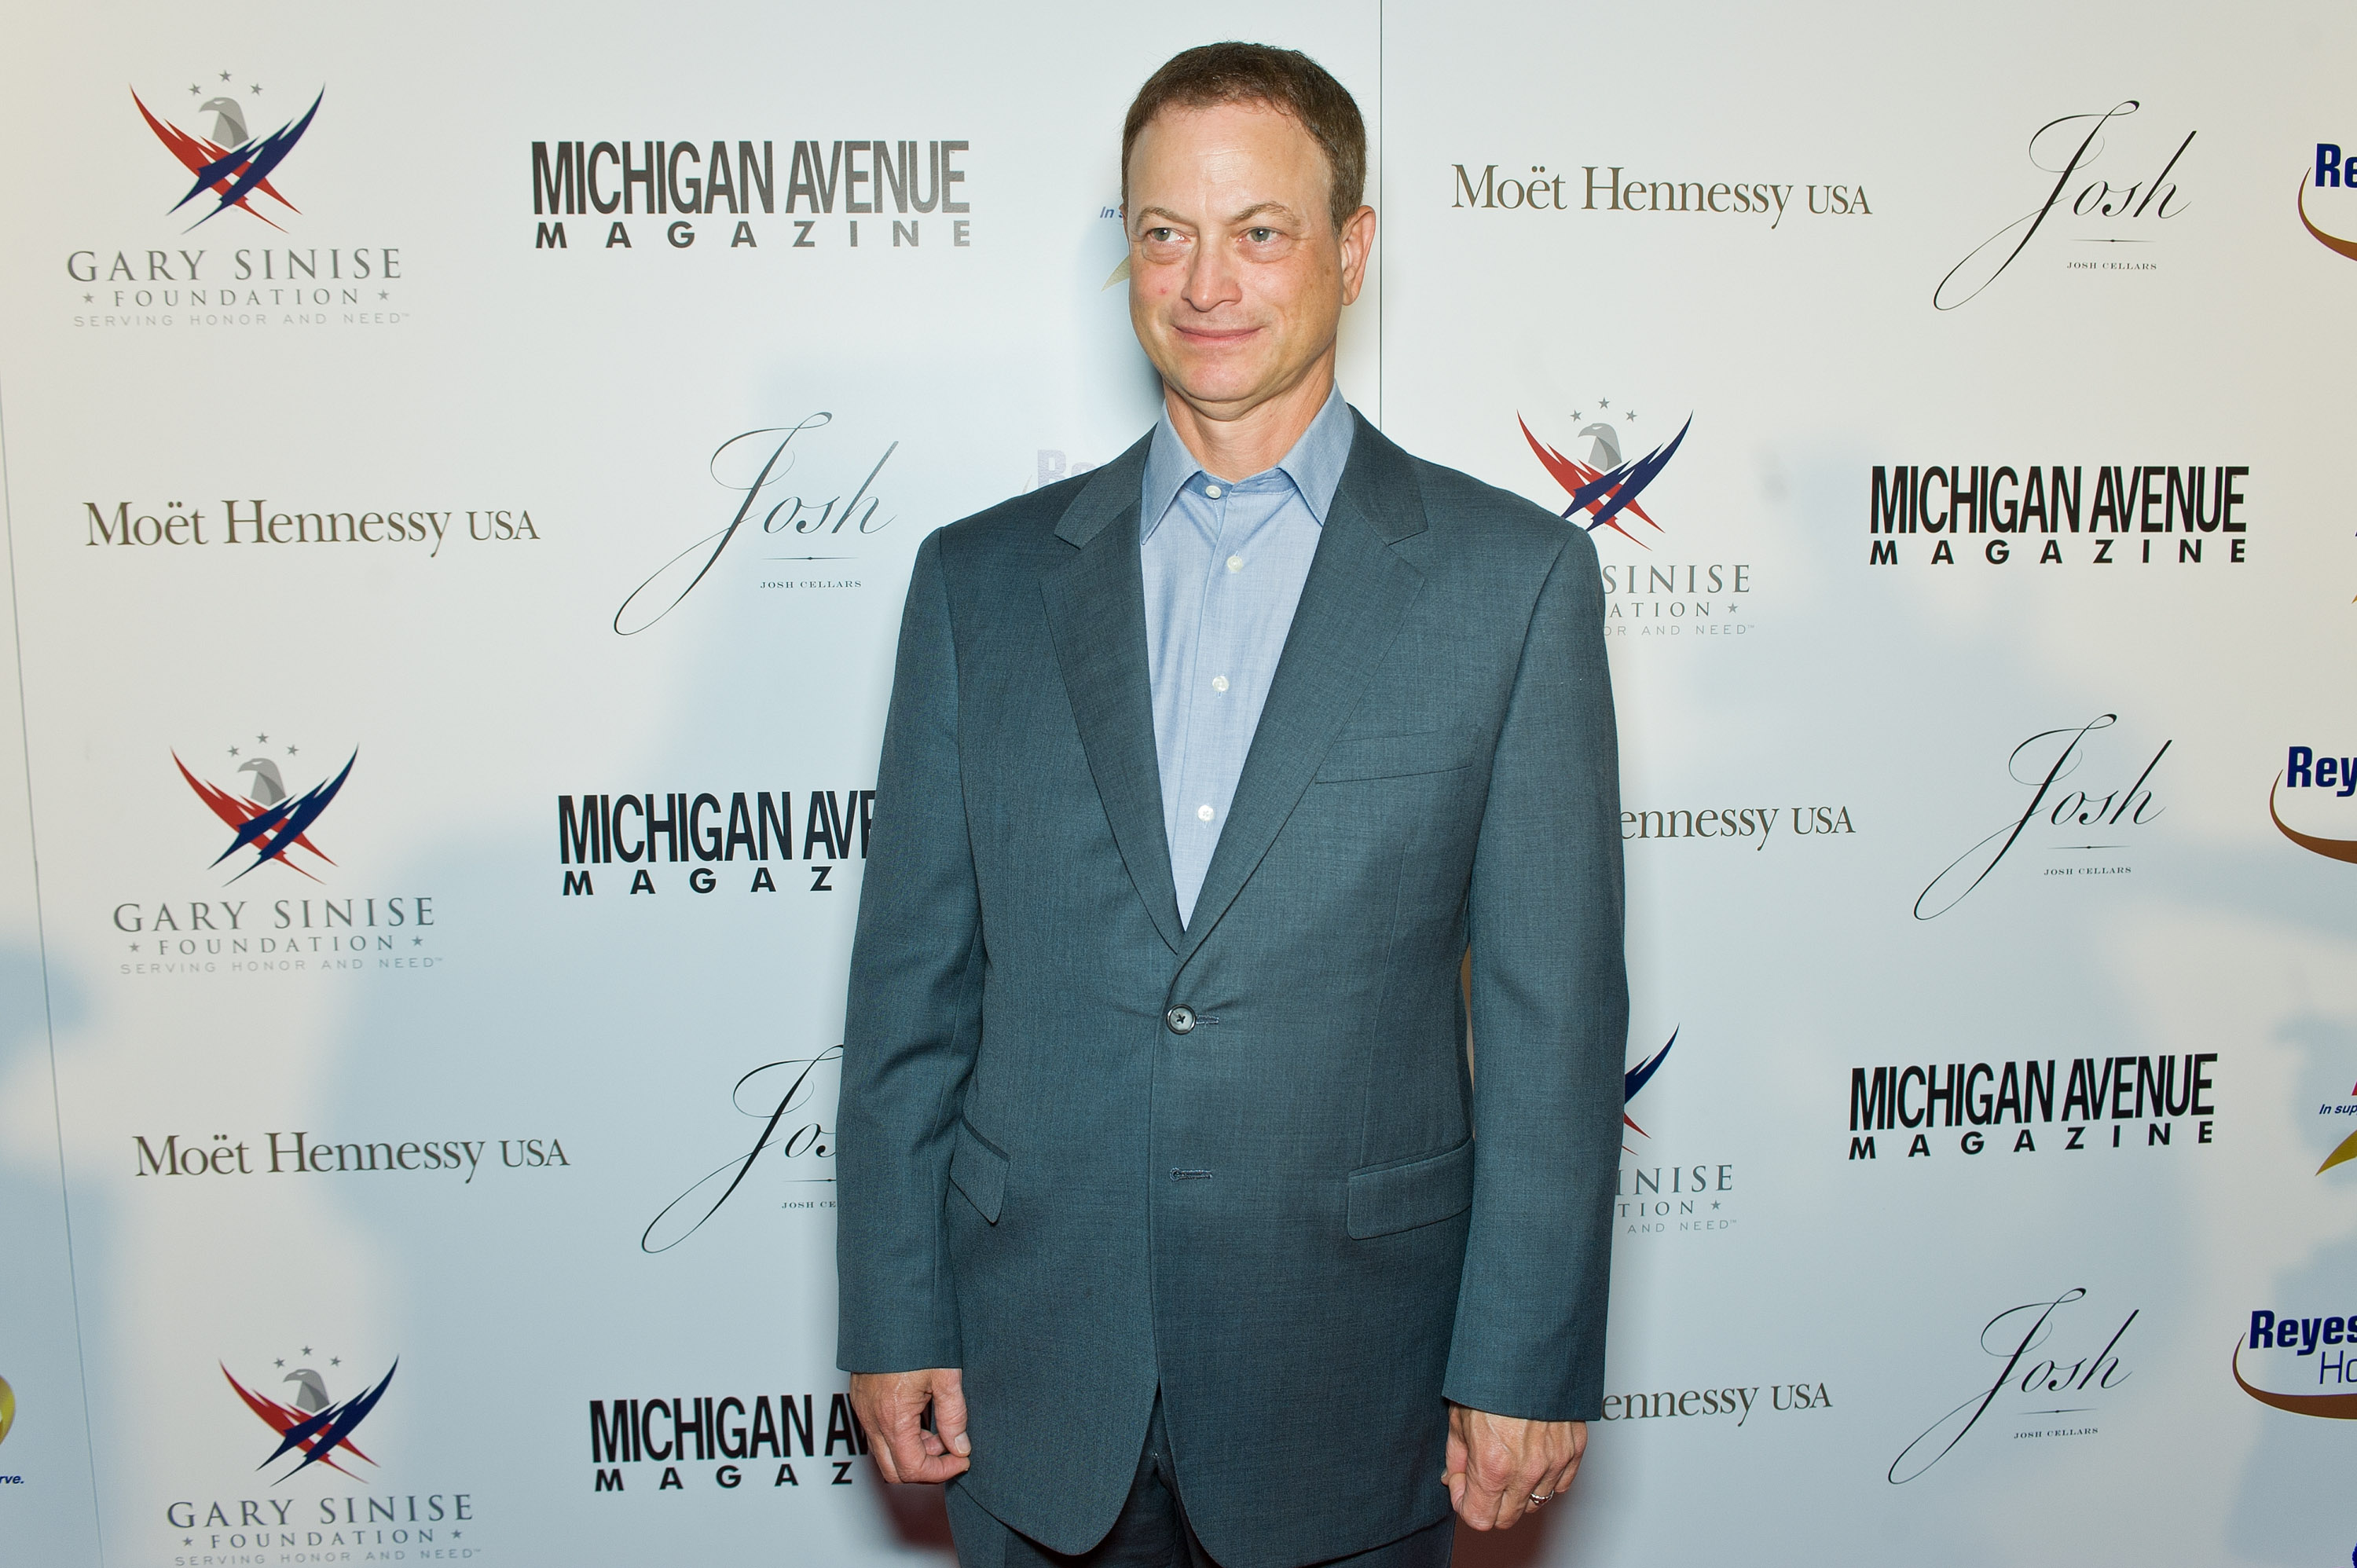 Gary Sinise at The Gary Sinise Foundation "Inspiration To Action" Benefit Dinner in Chicago, Illinois, on June 15, 2013. | Source: Getty Images